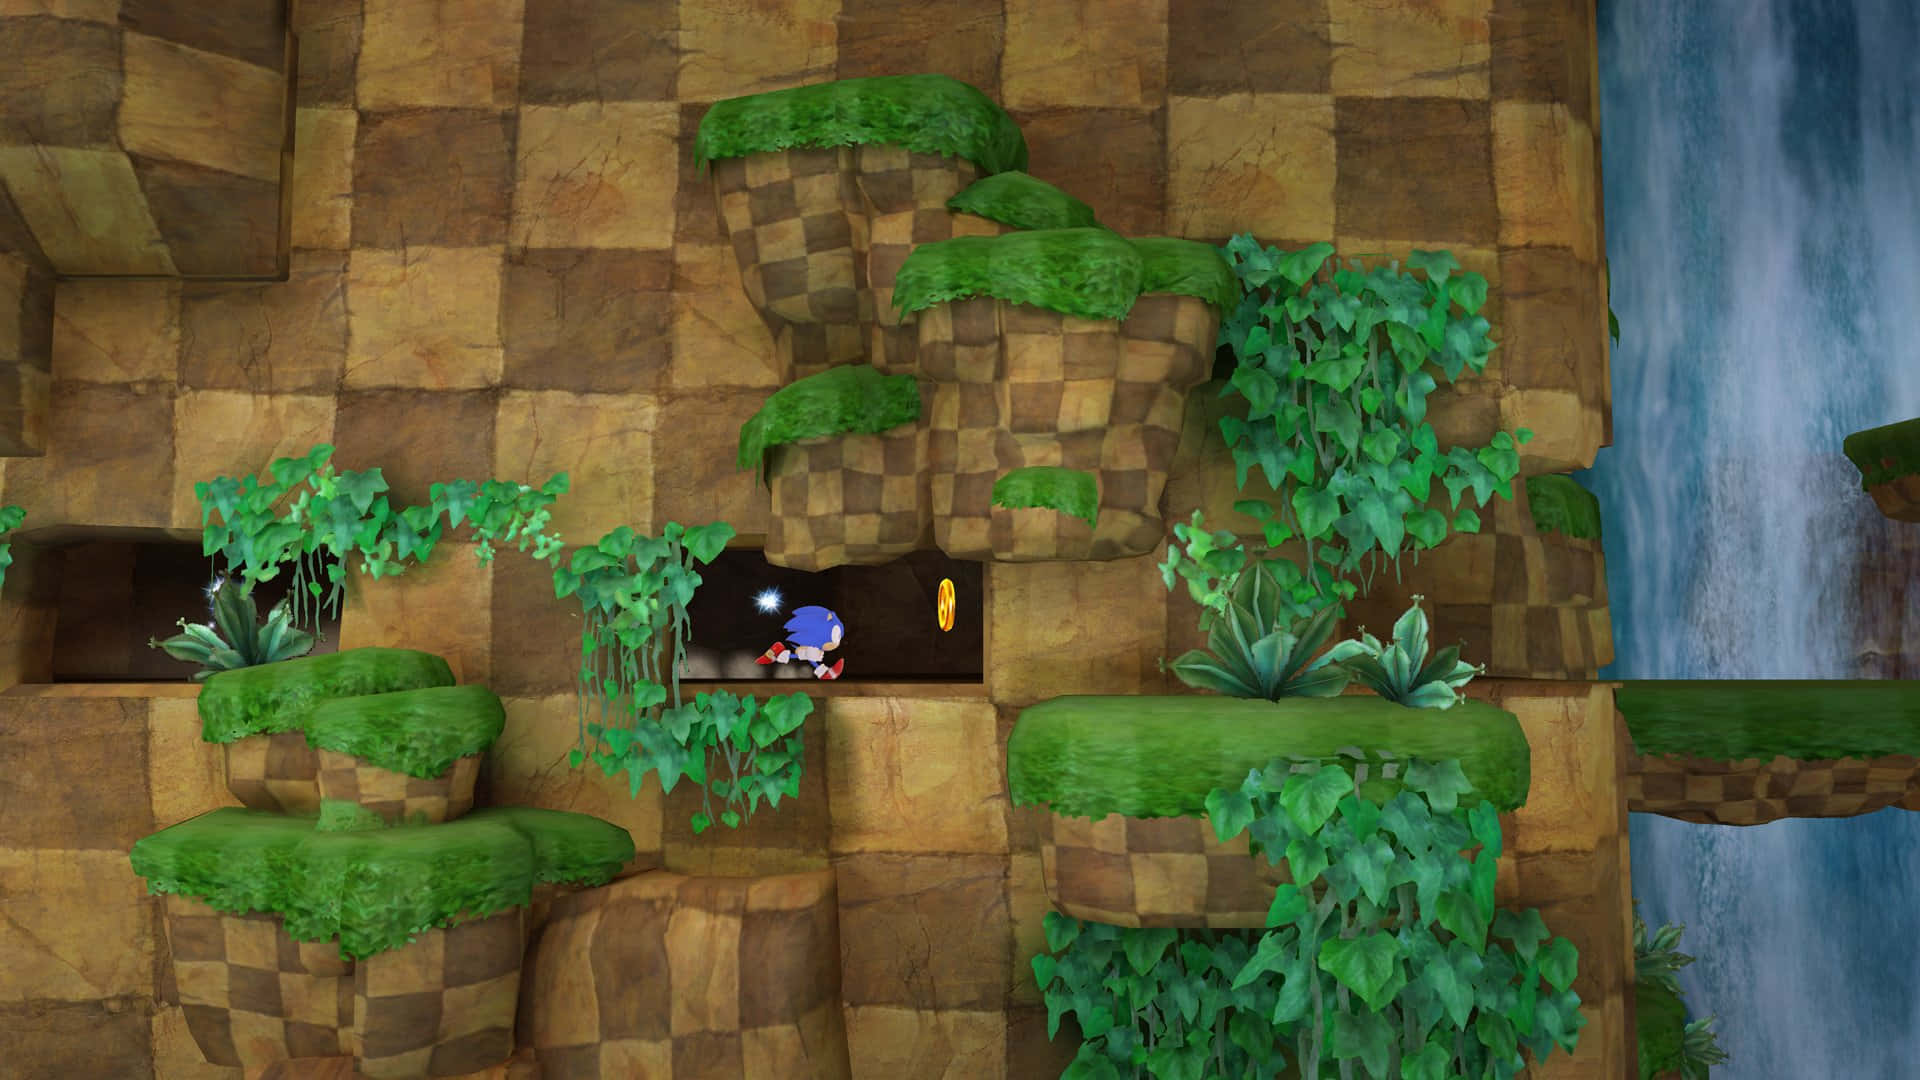 So what Green Hill Zone background should I use for Hill Act 1 for